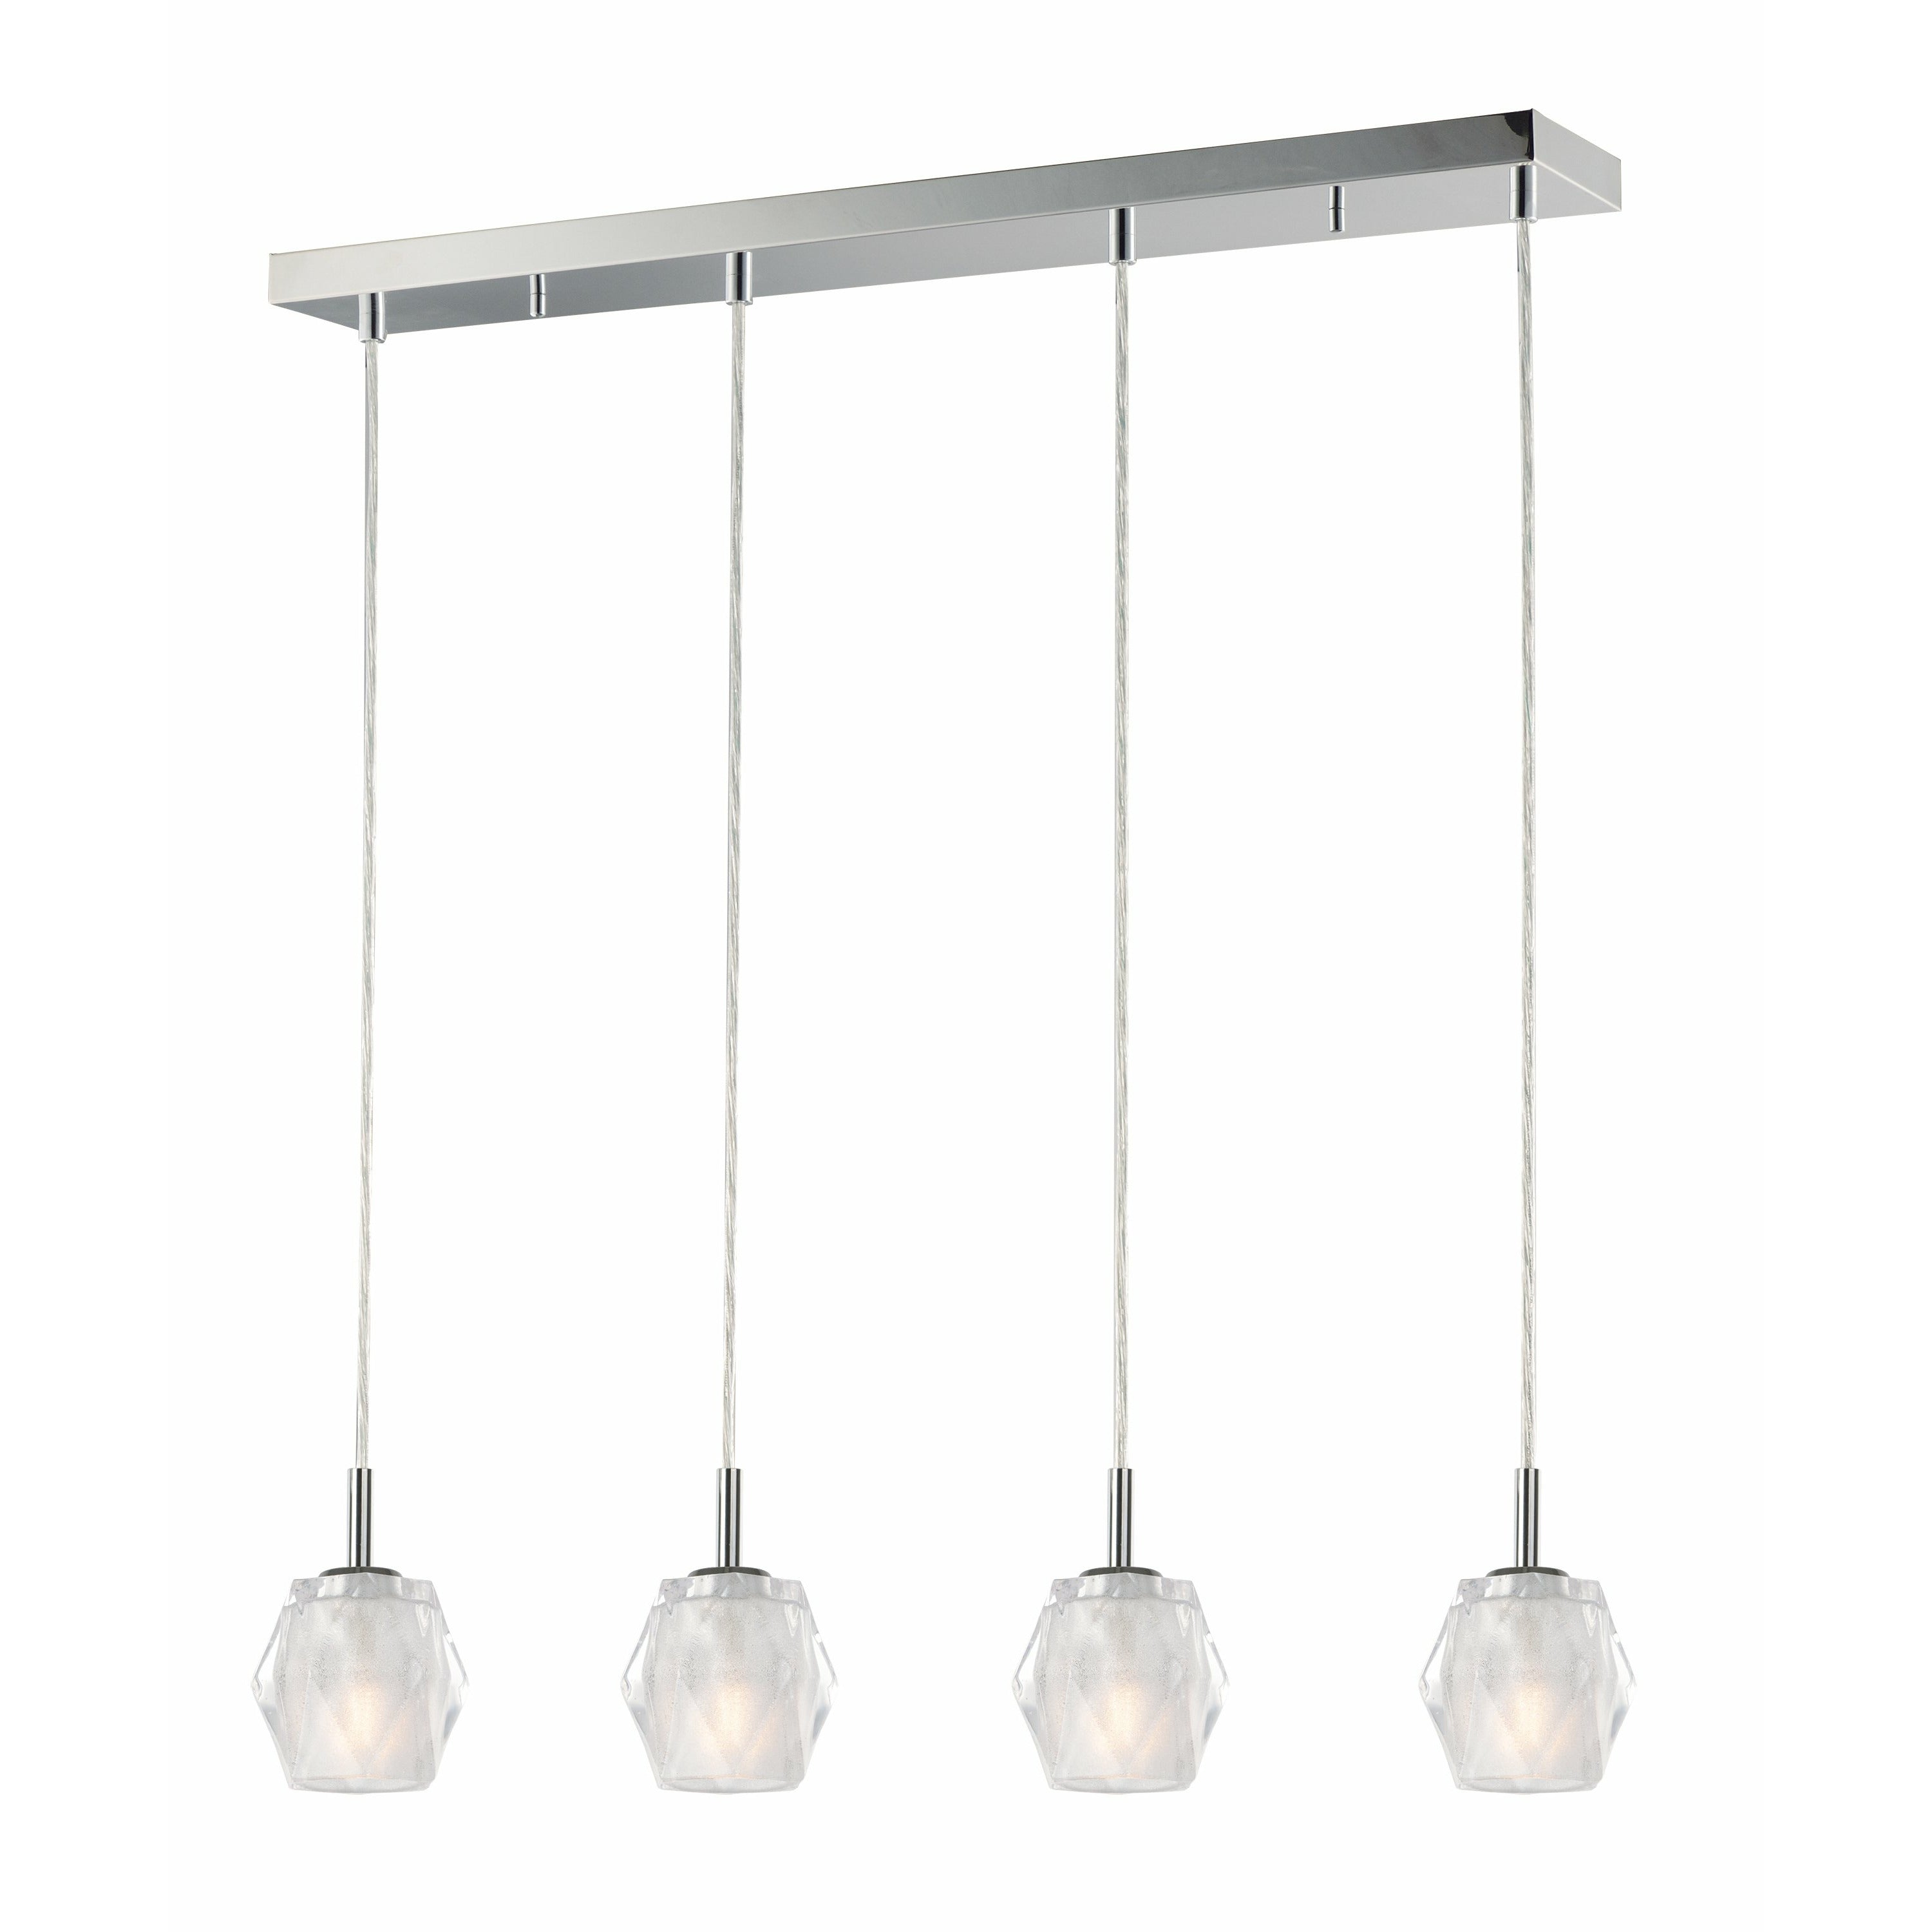 Tangent Linear Suspension Polished Chrome